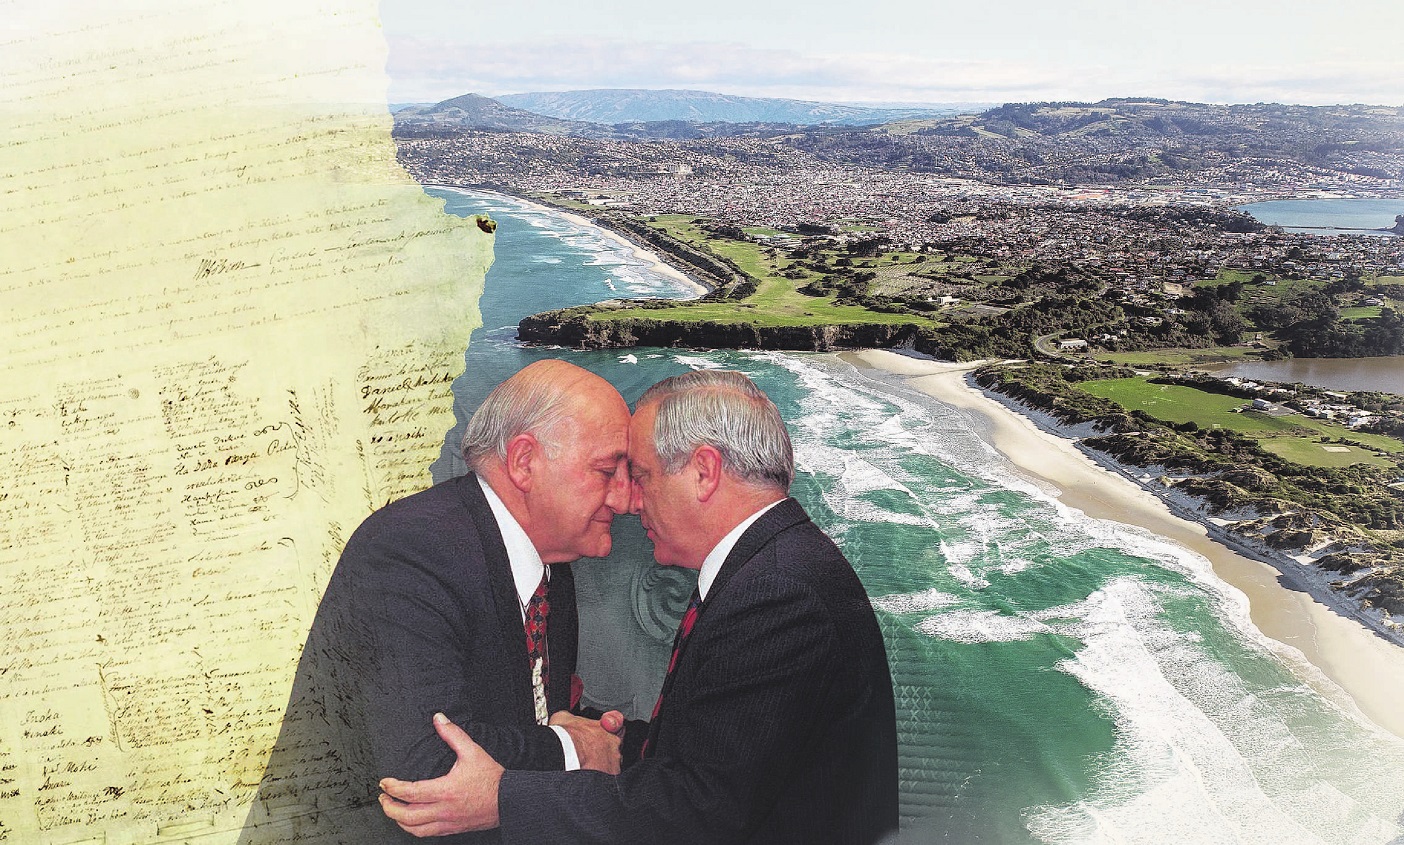 Co-governance has its basis in the Treaty of Waitangi, it is argued. Featured in this composite...